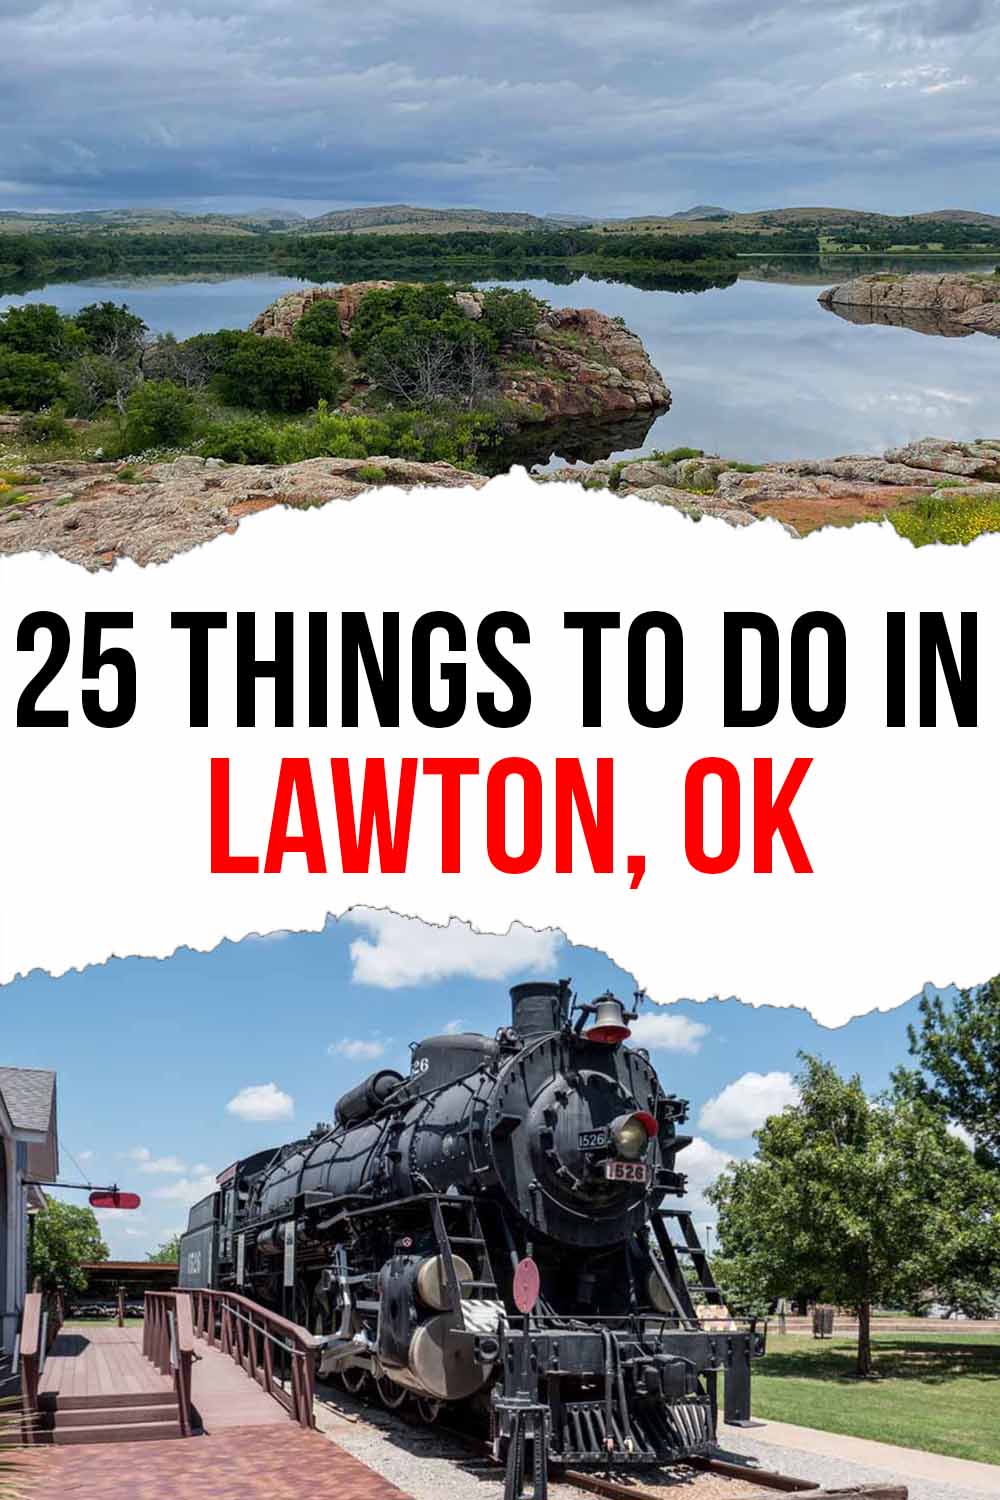 Best Things to do in Lawton, OK